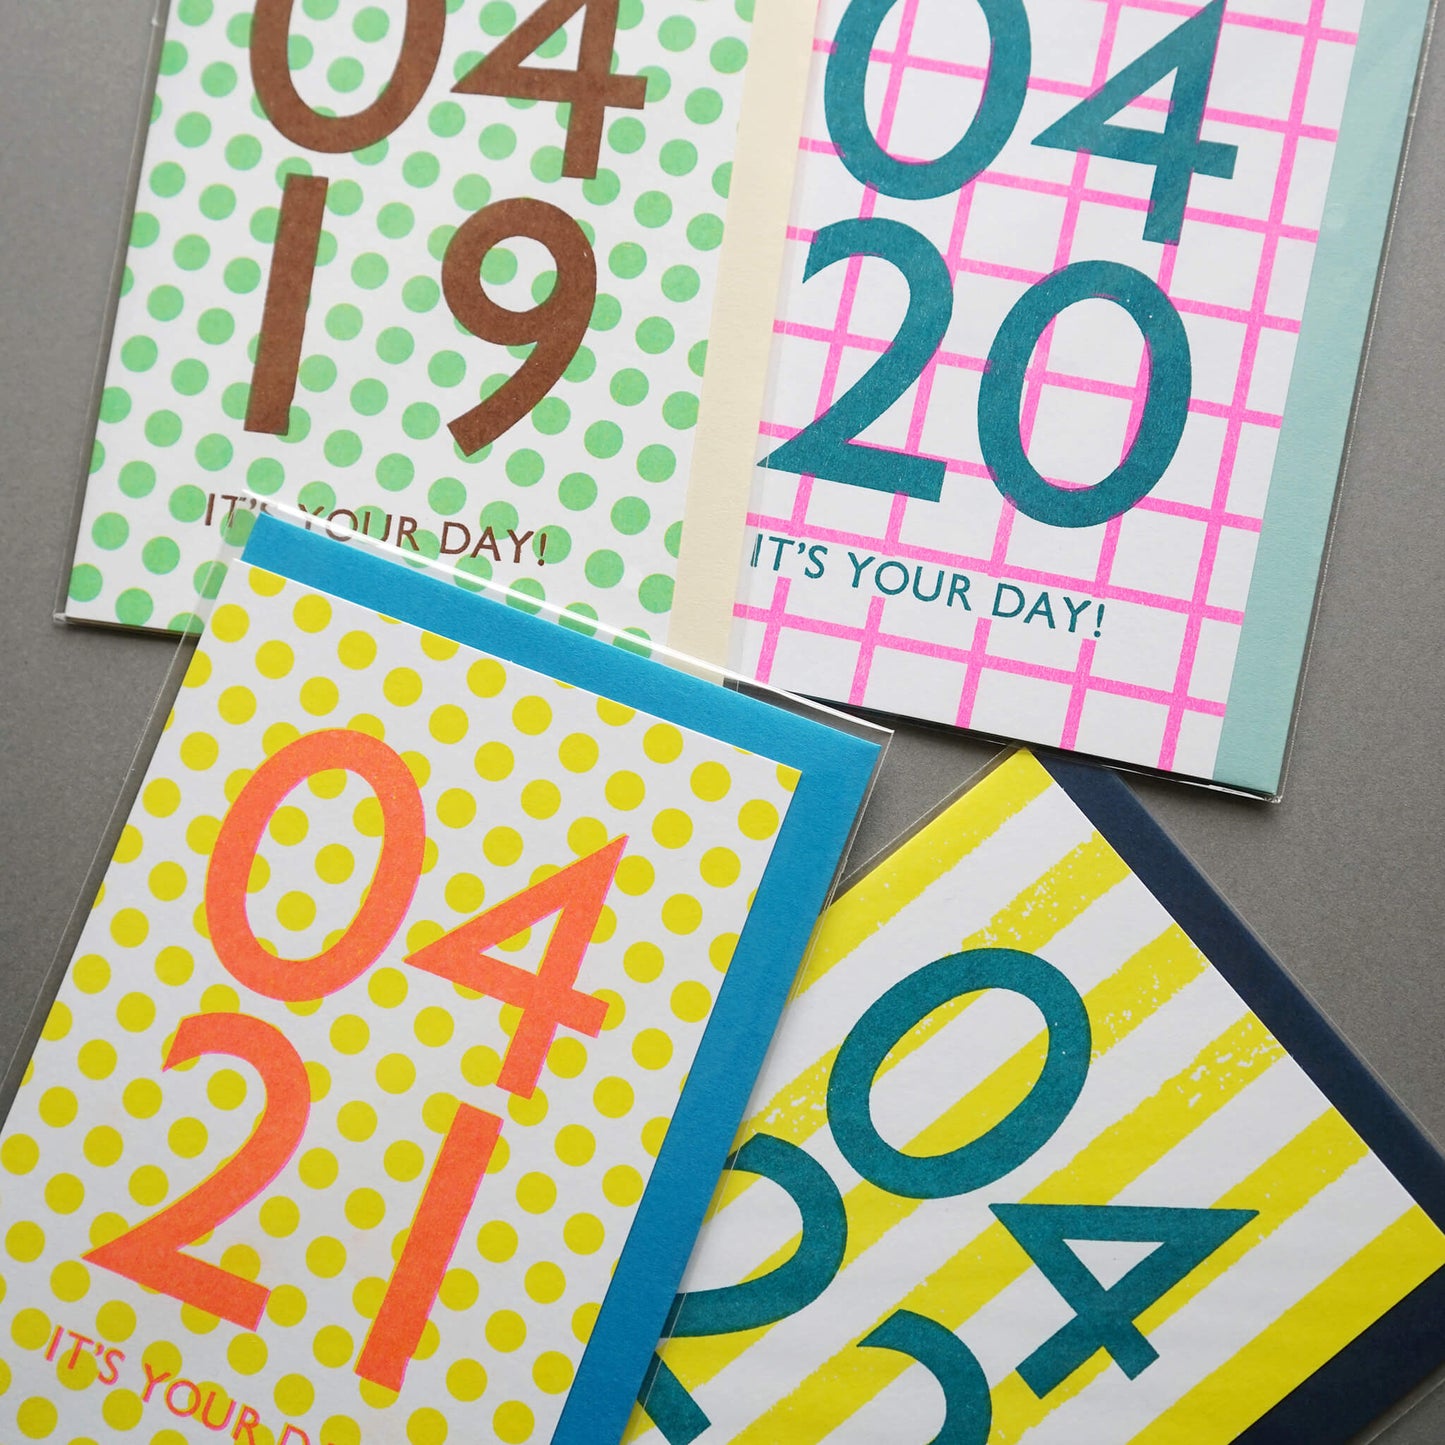 【April - 4月】365 Find Your Day